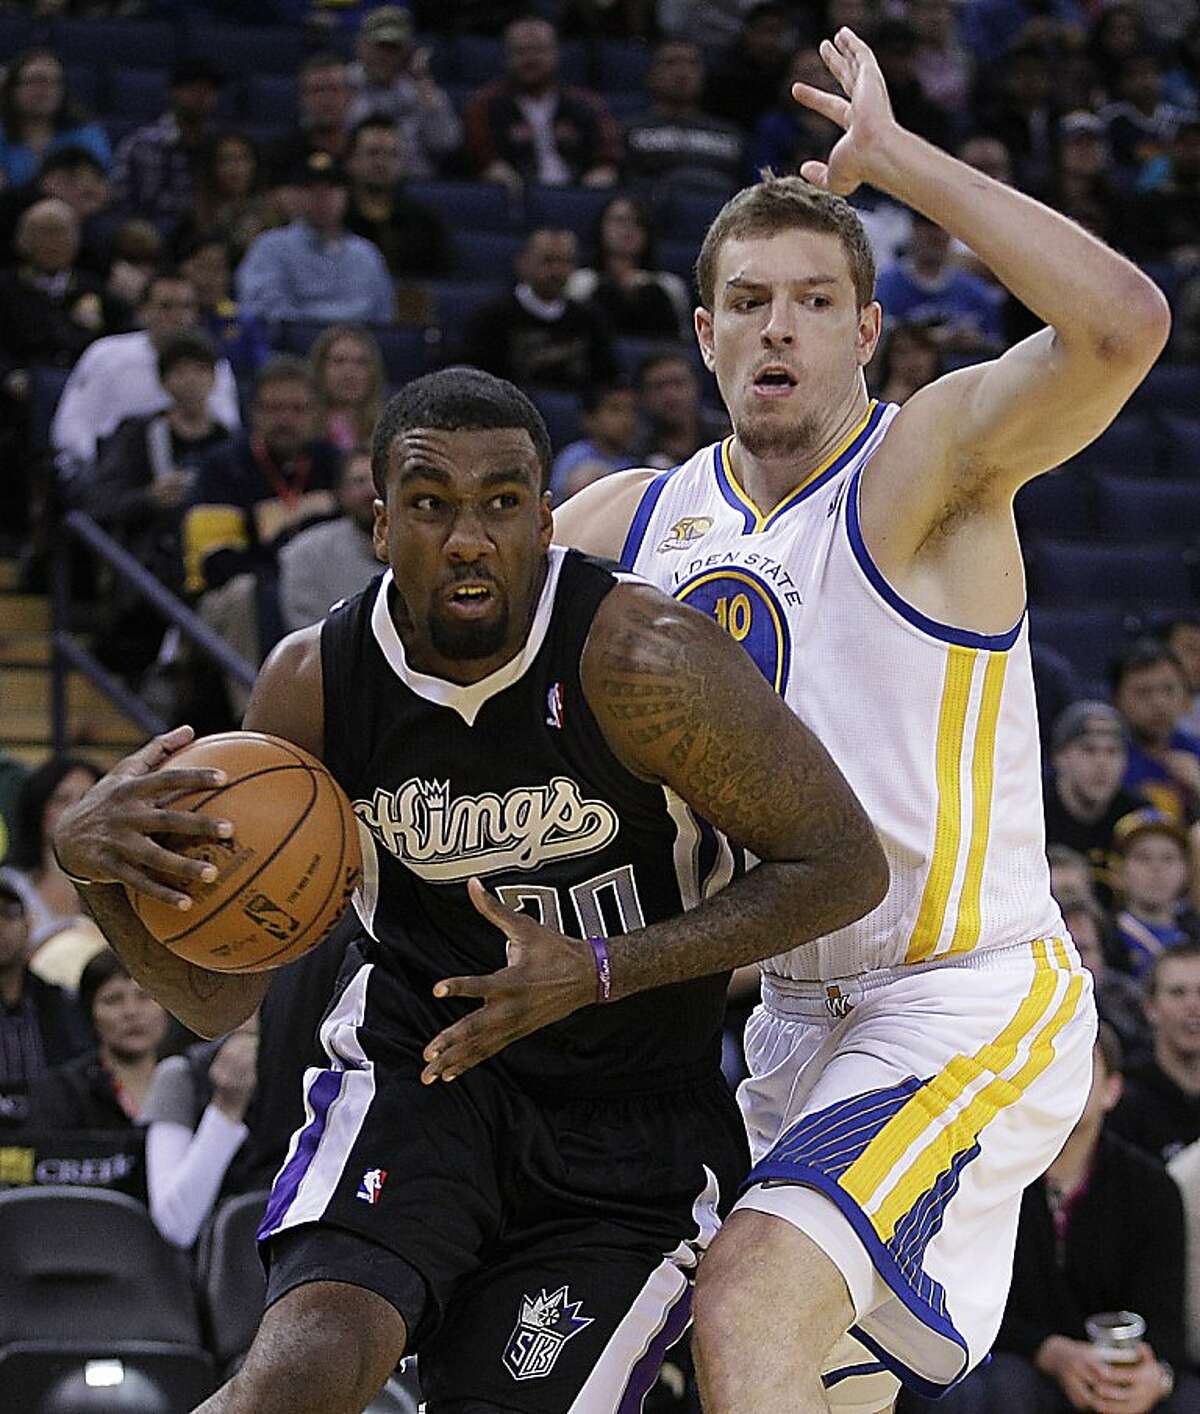 Sacramento Kings' Donte Greene, left, drives past Golden State Warriors' David Lee during the first half of an NBA basketball game Saturday, March 24, 2012, in Oakland, Calif.